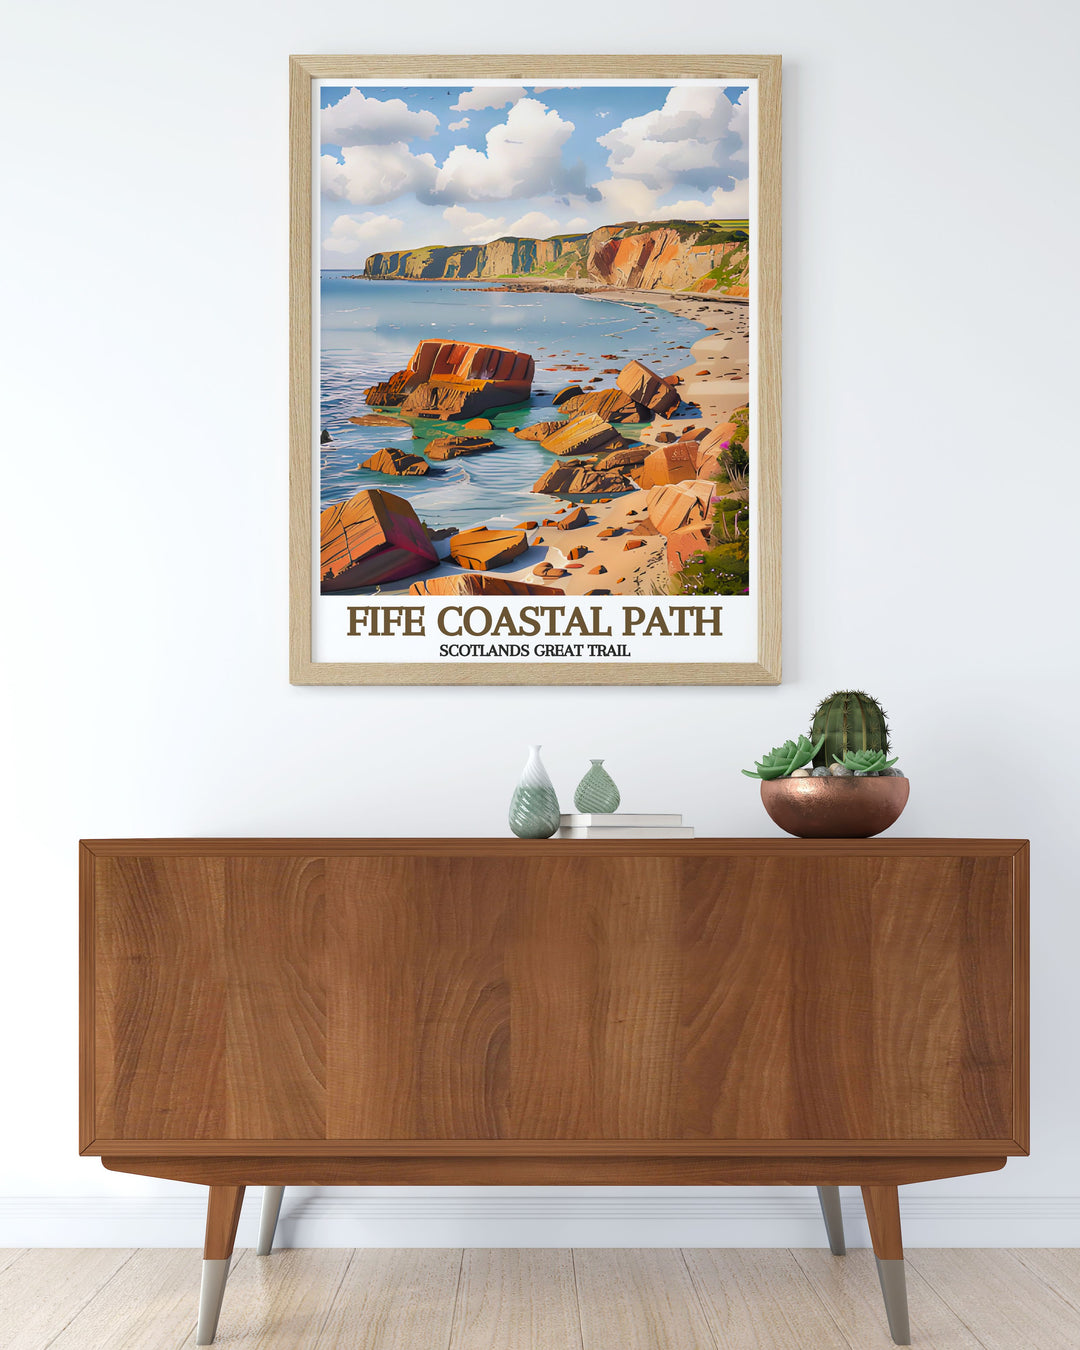 The breathtaking scenery of Kincraig Point and the lush landscapes of the Fife Coastal Path are beautifully illustrated in this poster, celebrating the natural beauty and tranquility of Scotland.